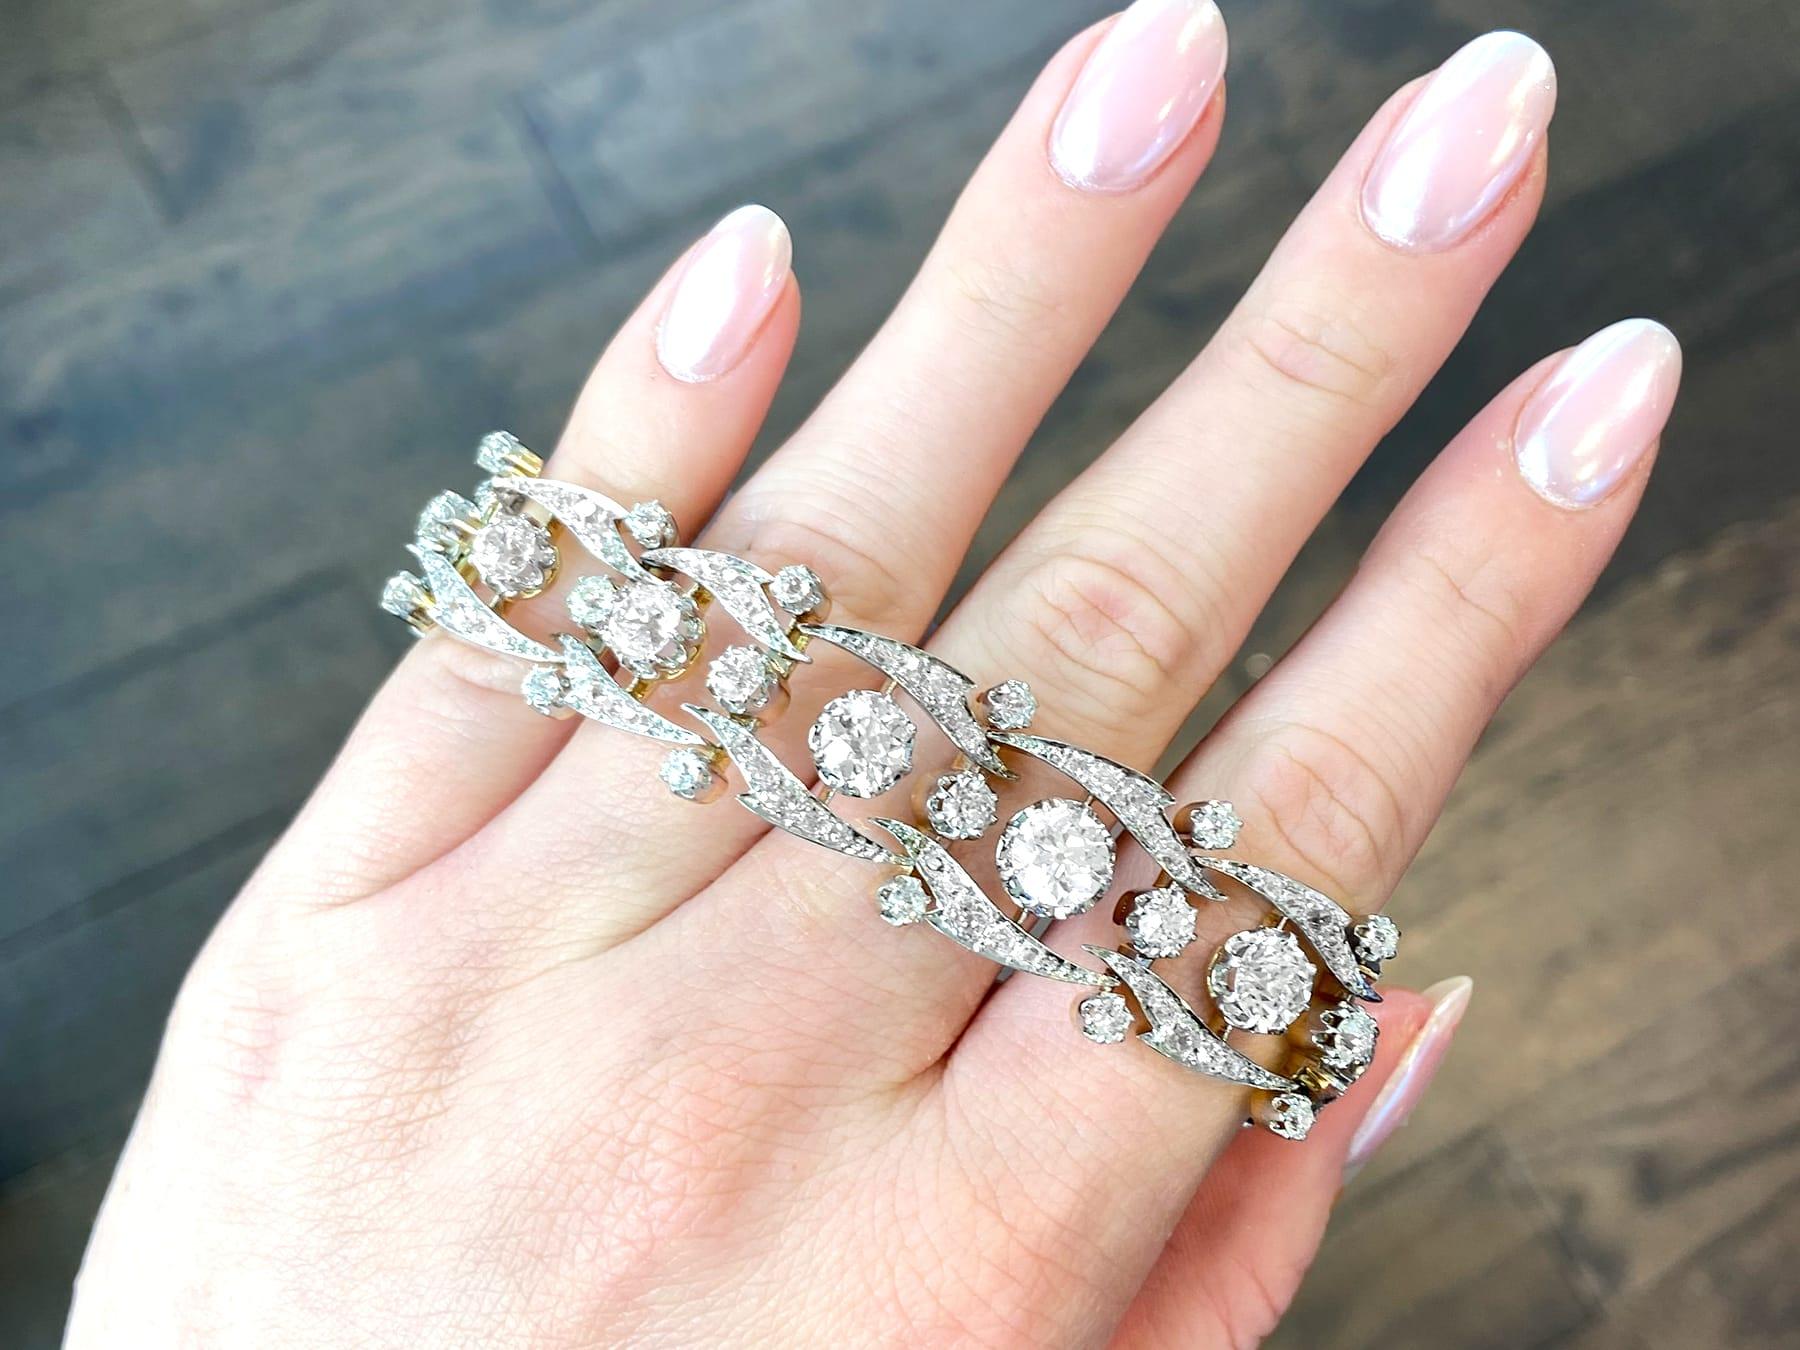 A stunning antique French 17.35 carat diamond and 18 karat yellow gold, 18 karat white gold bracelet; part of our diverse antique jewelry and estate jewelry collections.

This stunning, fine and impressive French antique diamond bracelet has been